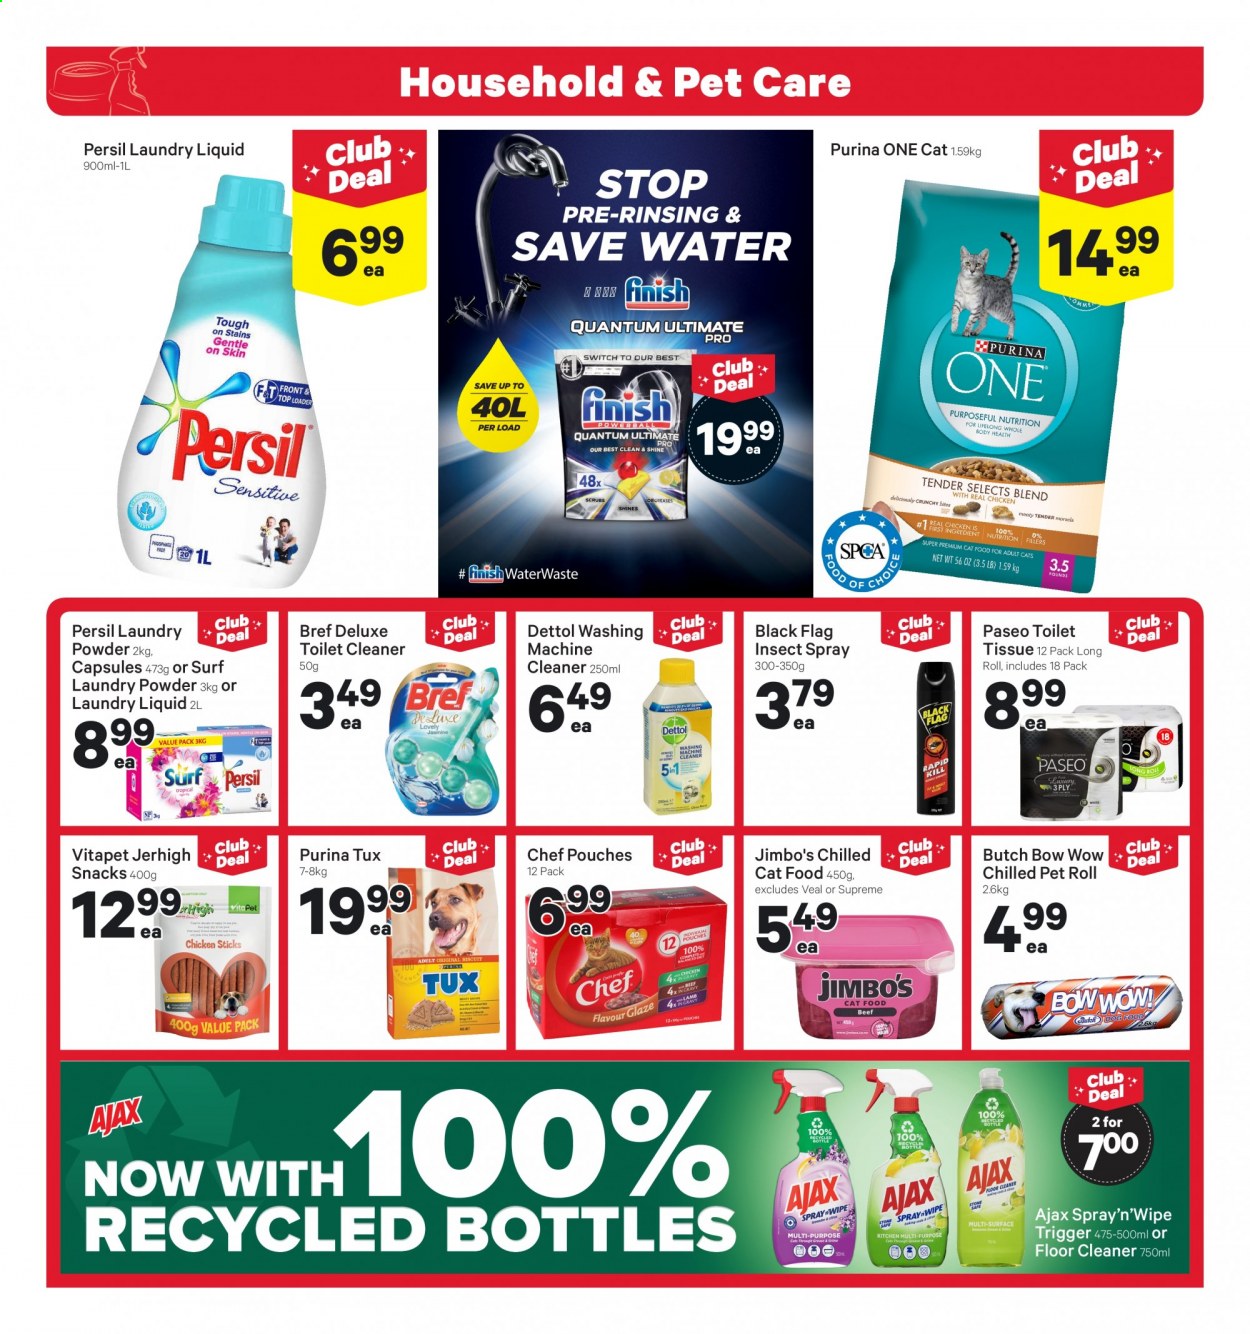 thumbnail - New World mailer - 01.03.2021 - 07.03.2021 - Sales products - biscuit, snack, veal meat, Dettol, toilet paper, tissues, cleaner, laundry detergent, laundry powder, floor cleaner, toilet cleaner, washing machine cleaner. Page 17.